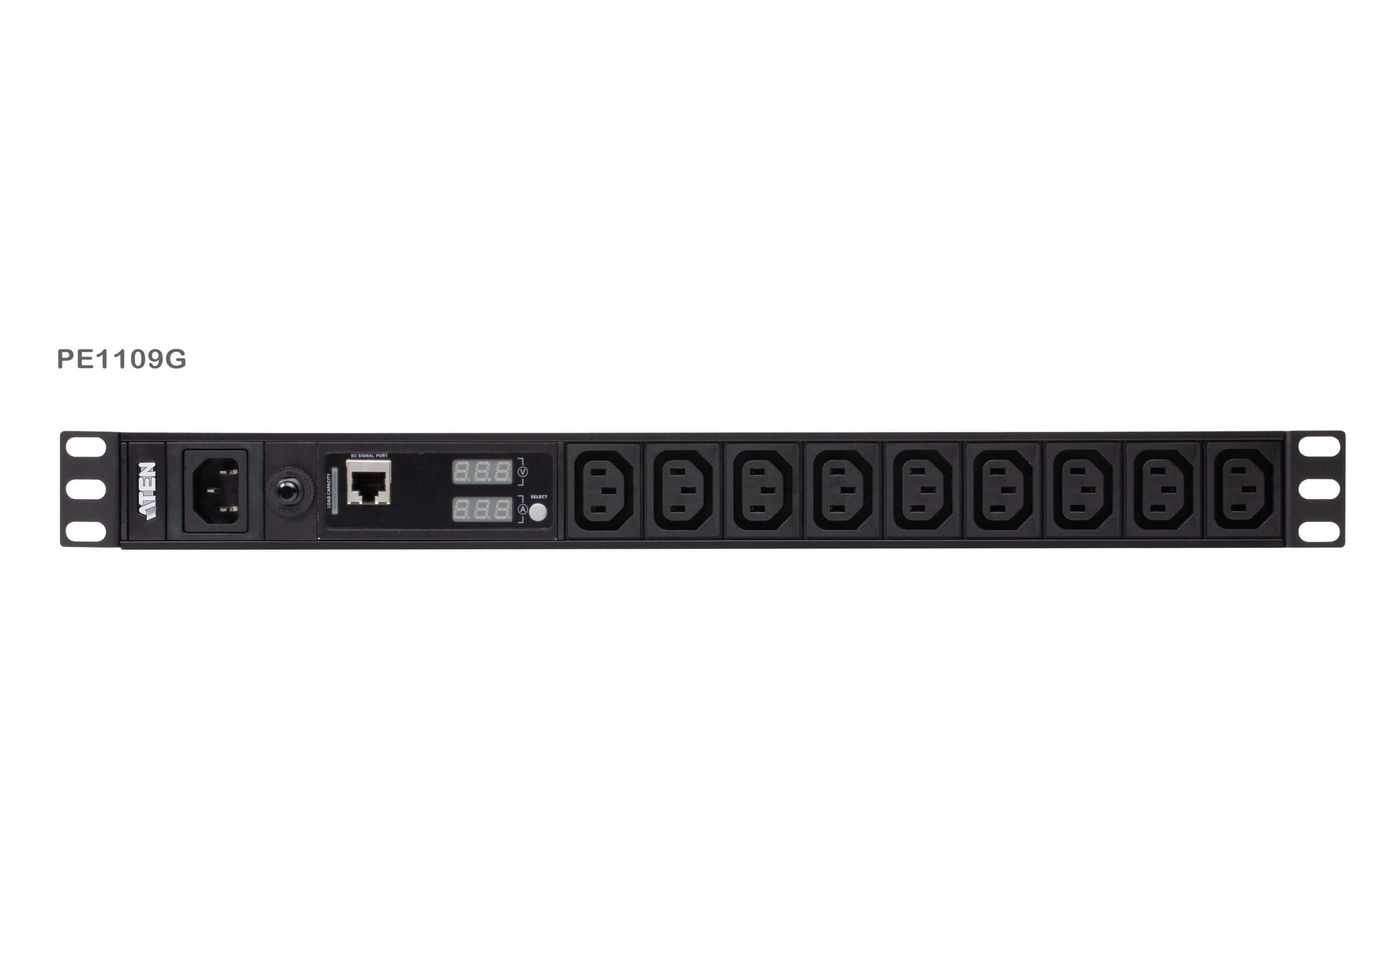 Aten PE1109G-AT-G W127285133 9-Outlet 1U PDU with Current 